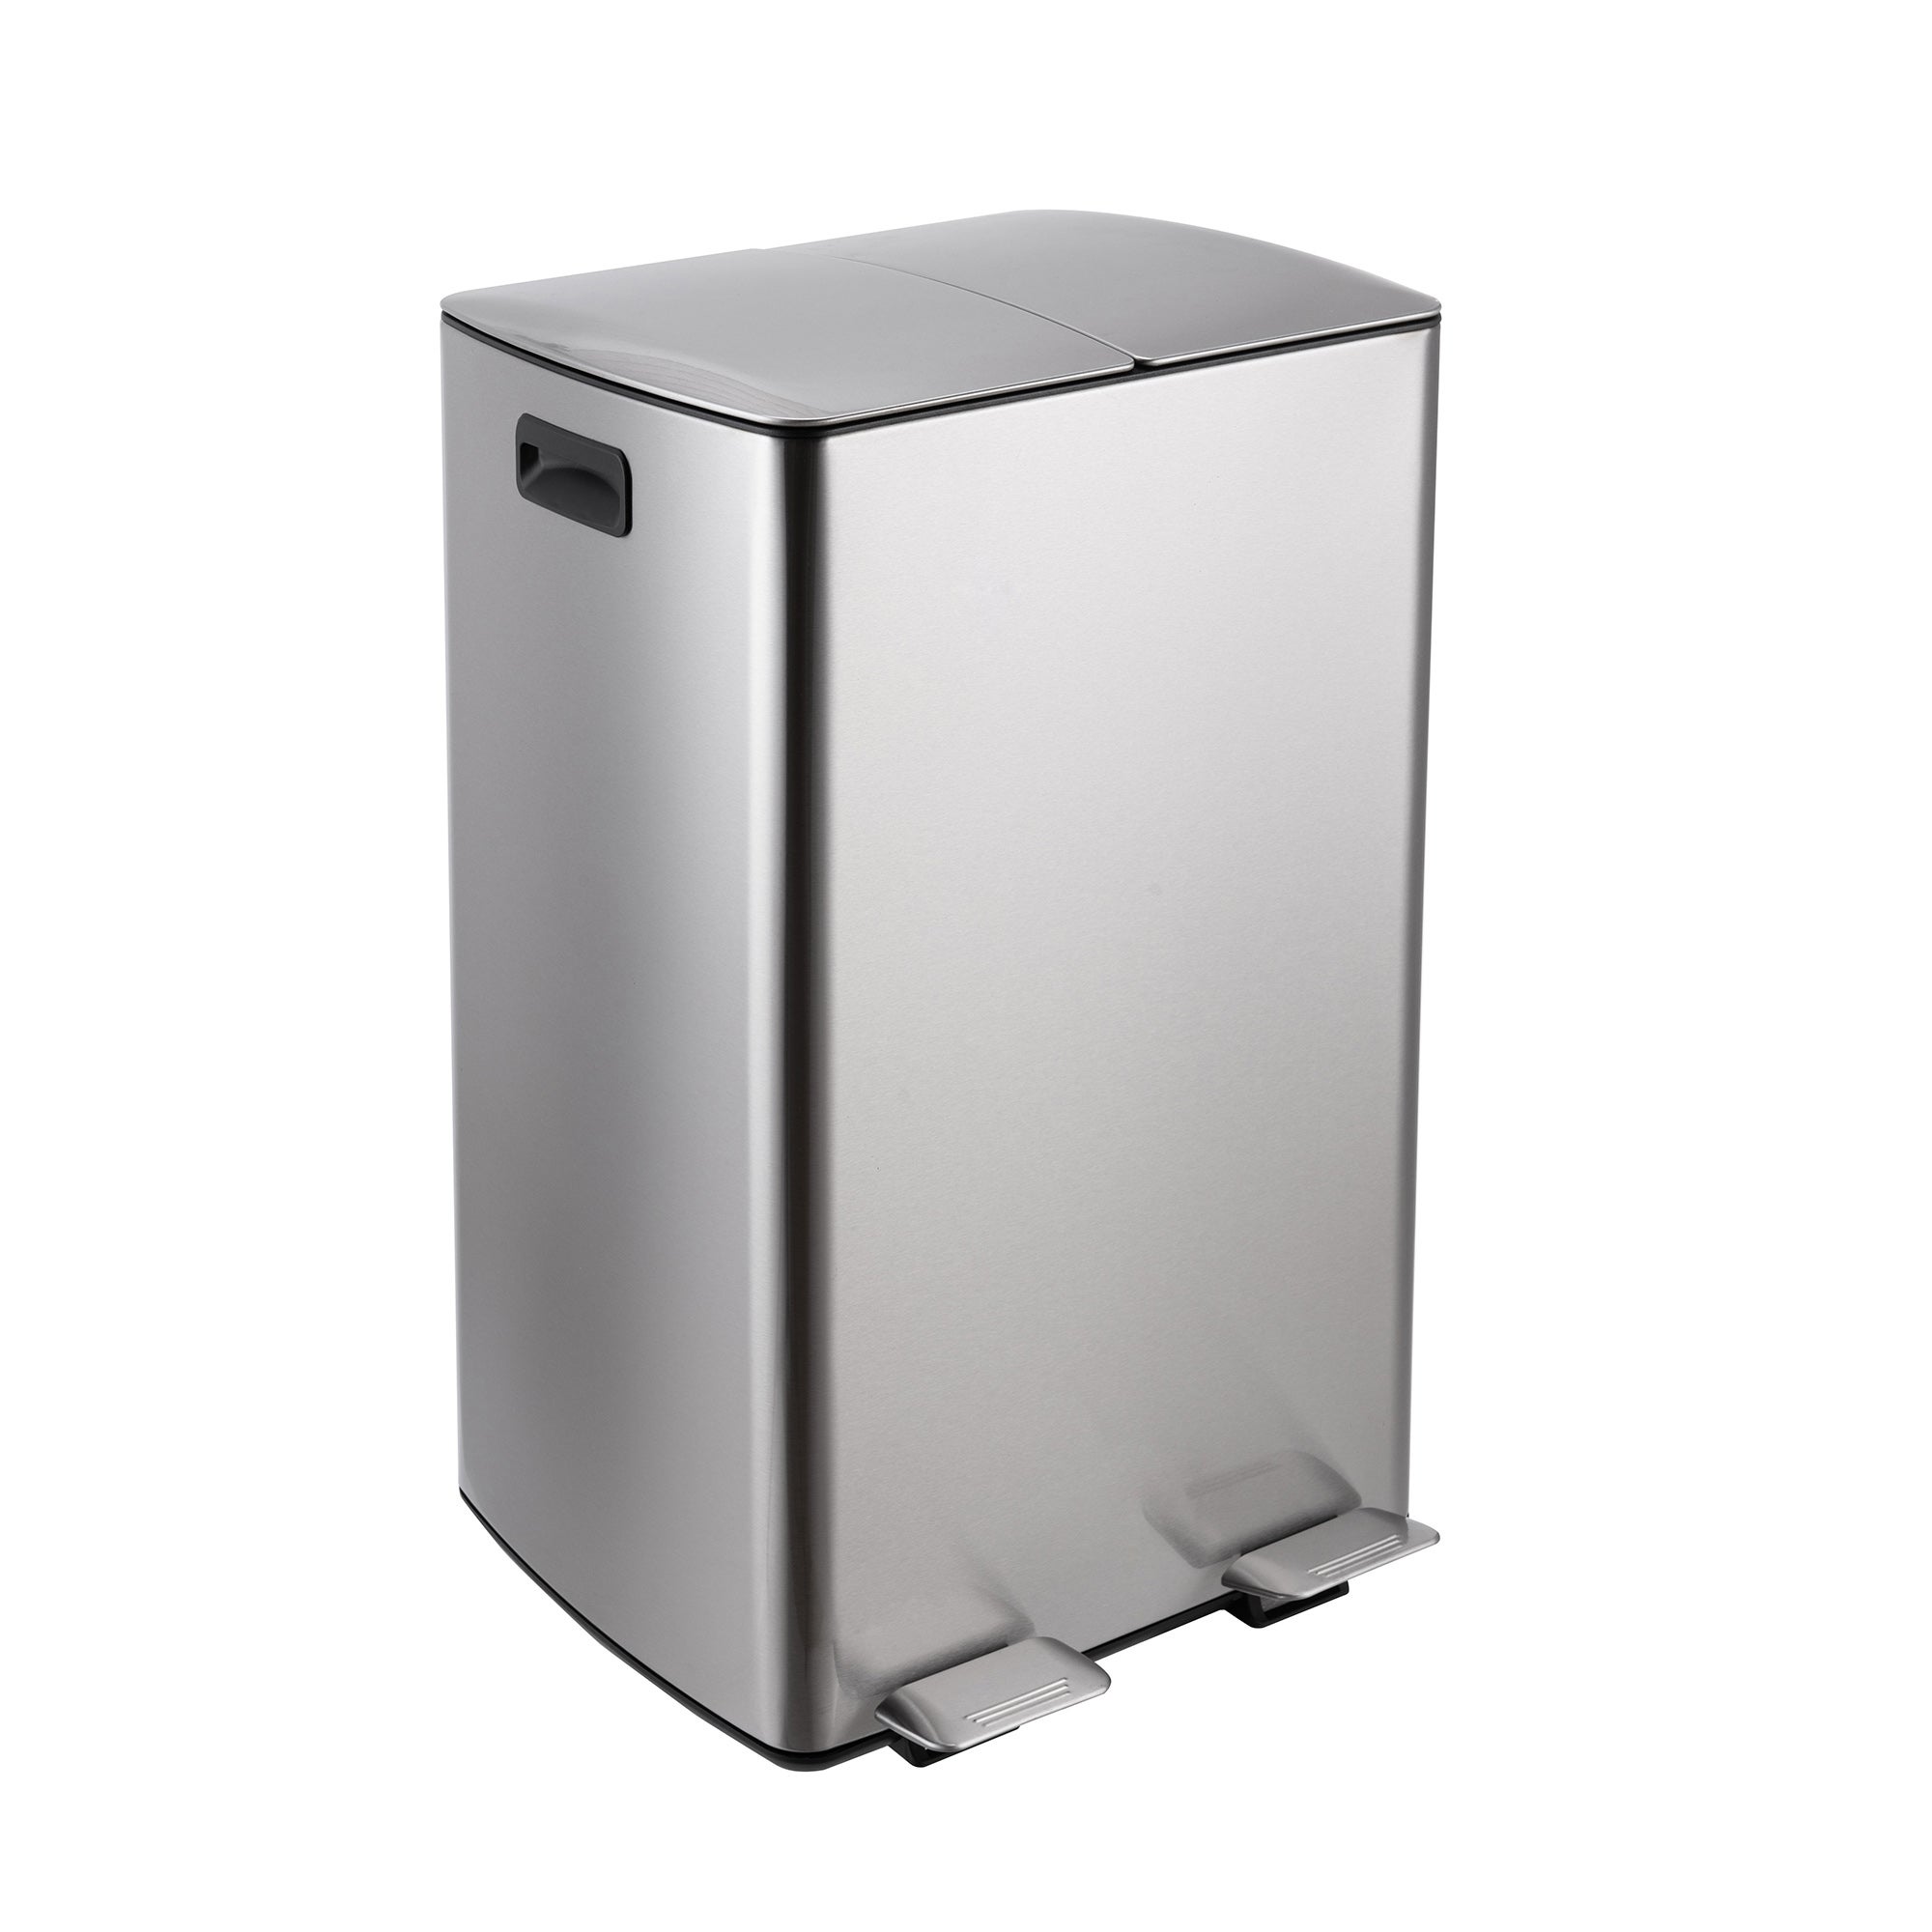 Stainless Steel 60L Curve Recycling Bin | Dunelm